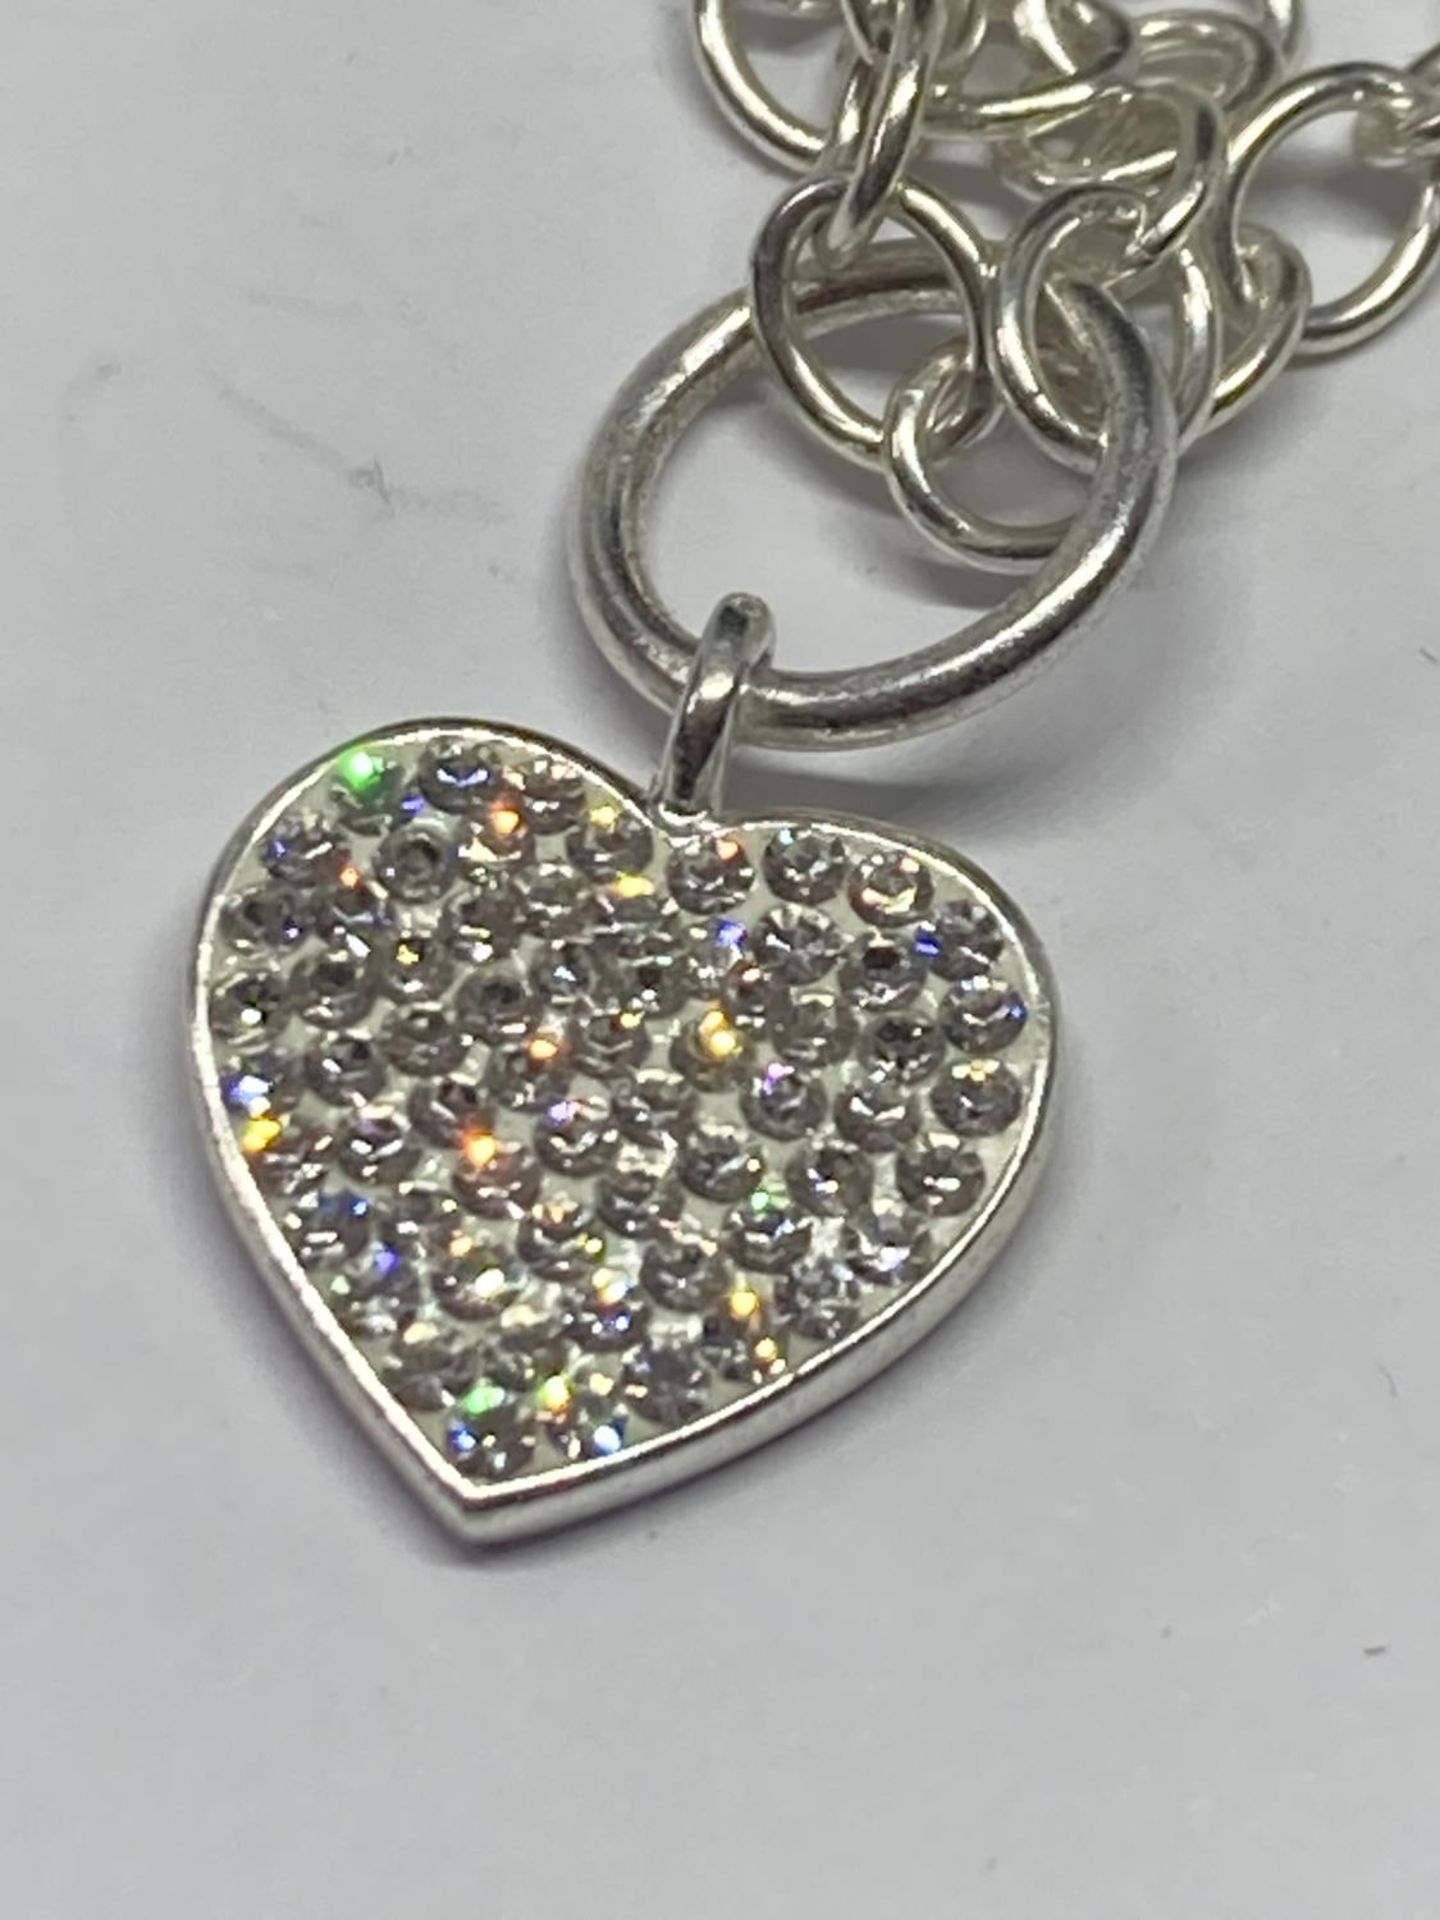 A SILVER T BAR NECKLACE WITH HEART CHARM LENGTH 18" - Image 2 of 3